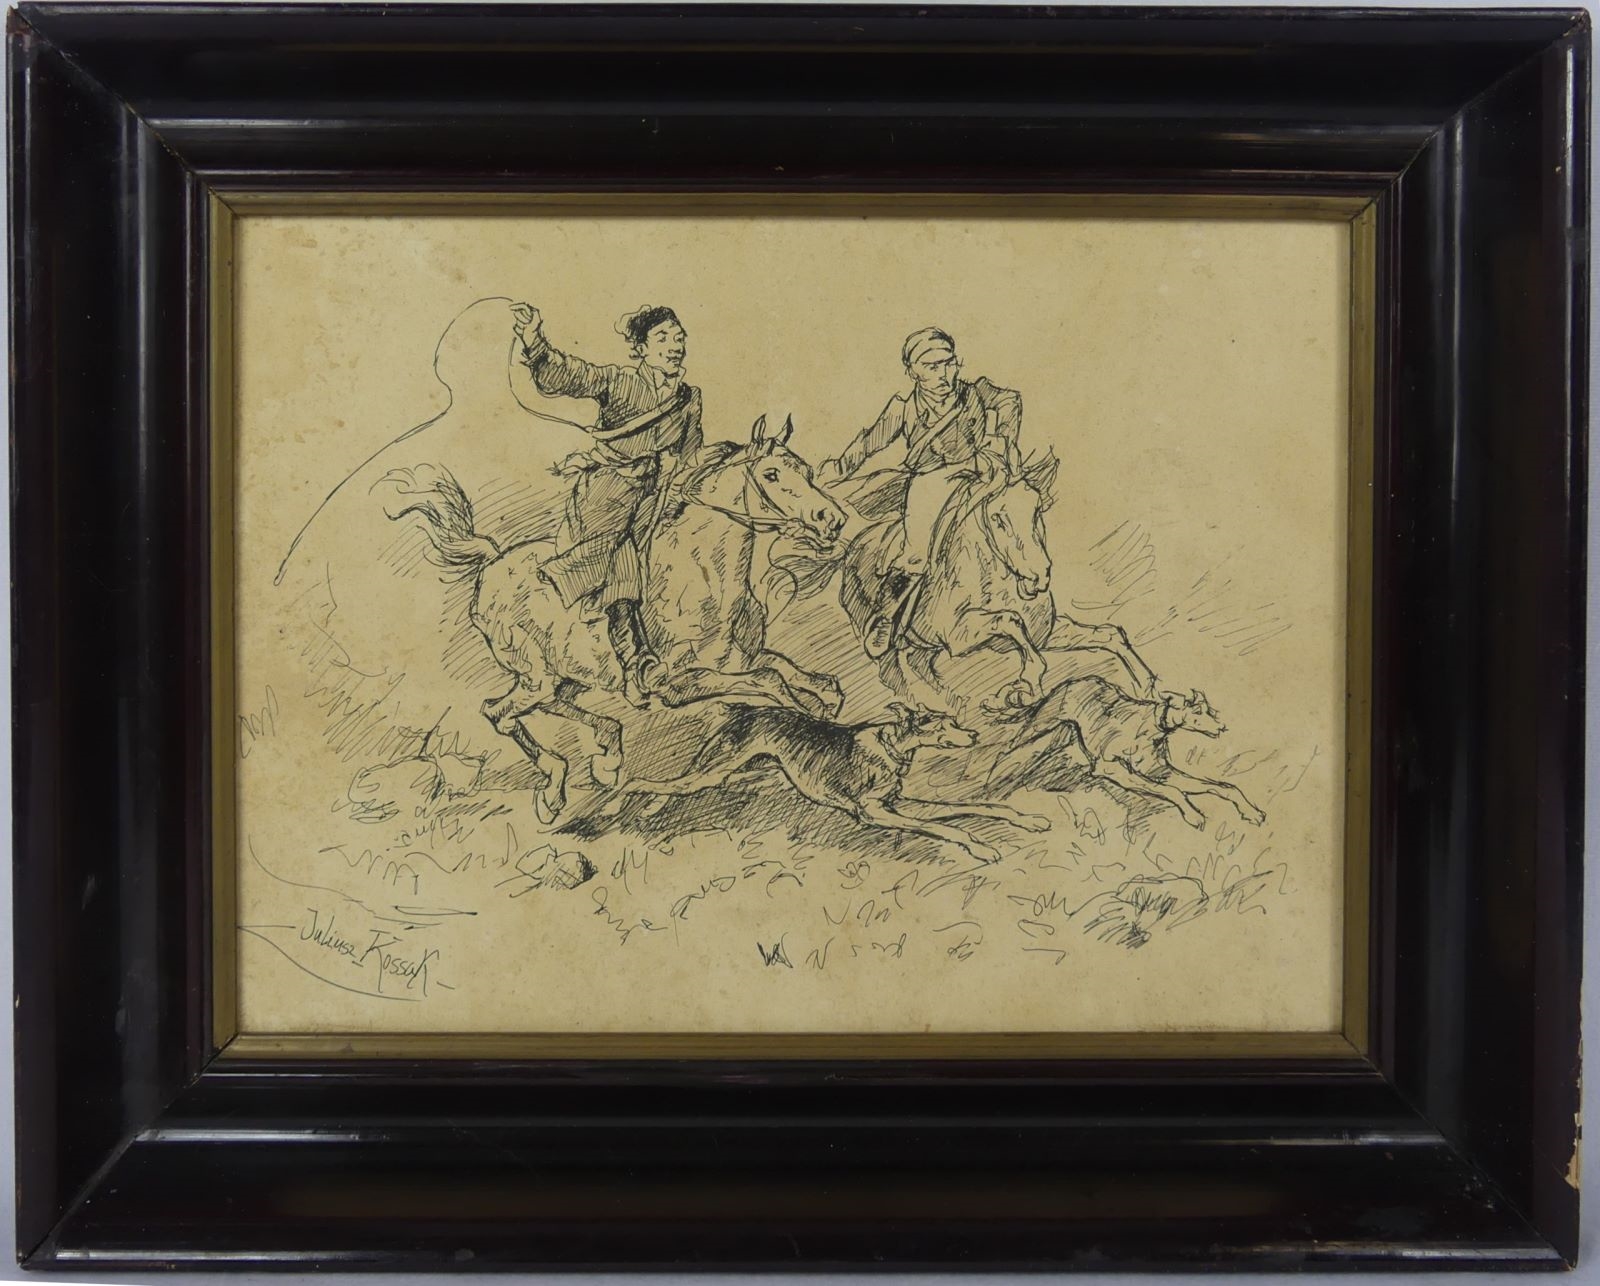 ink drawing on paper depicting two horses with riders - Julius Kossak